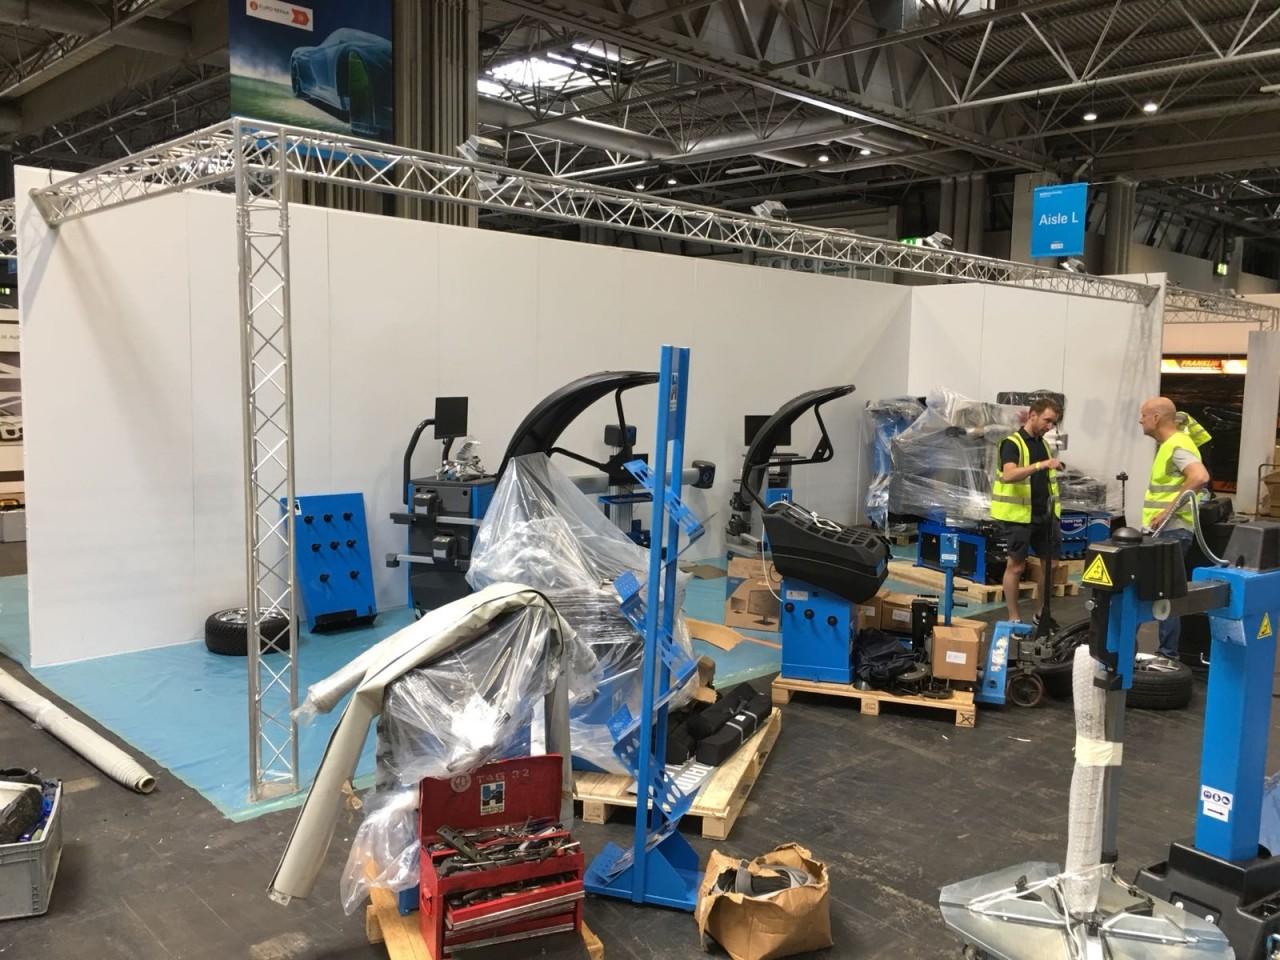 Arrival of Equipment at Automechanika 2018